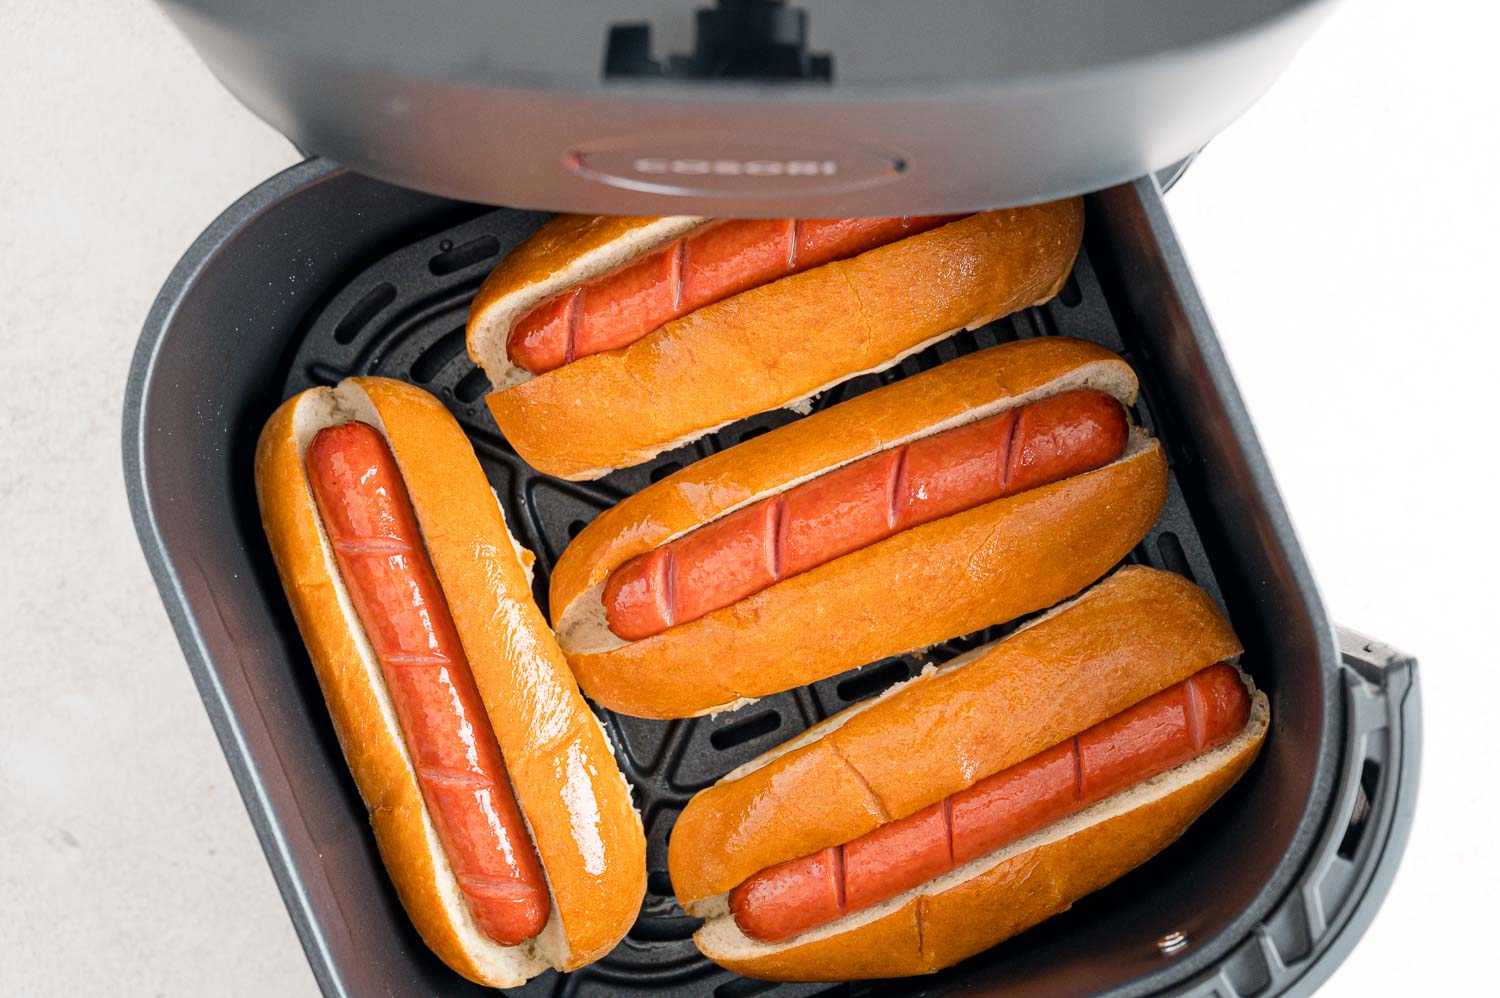 Hot dogs and buns in air fryer.